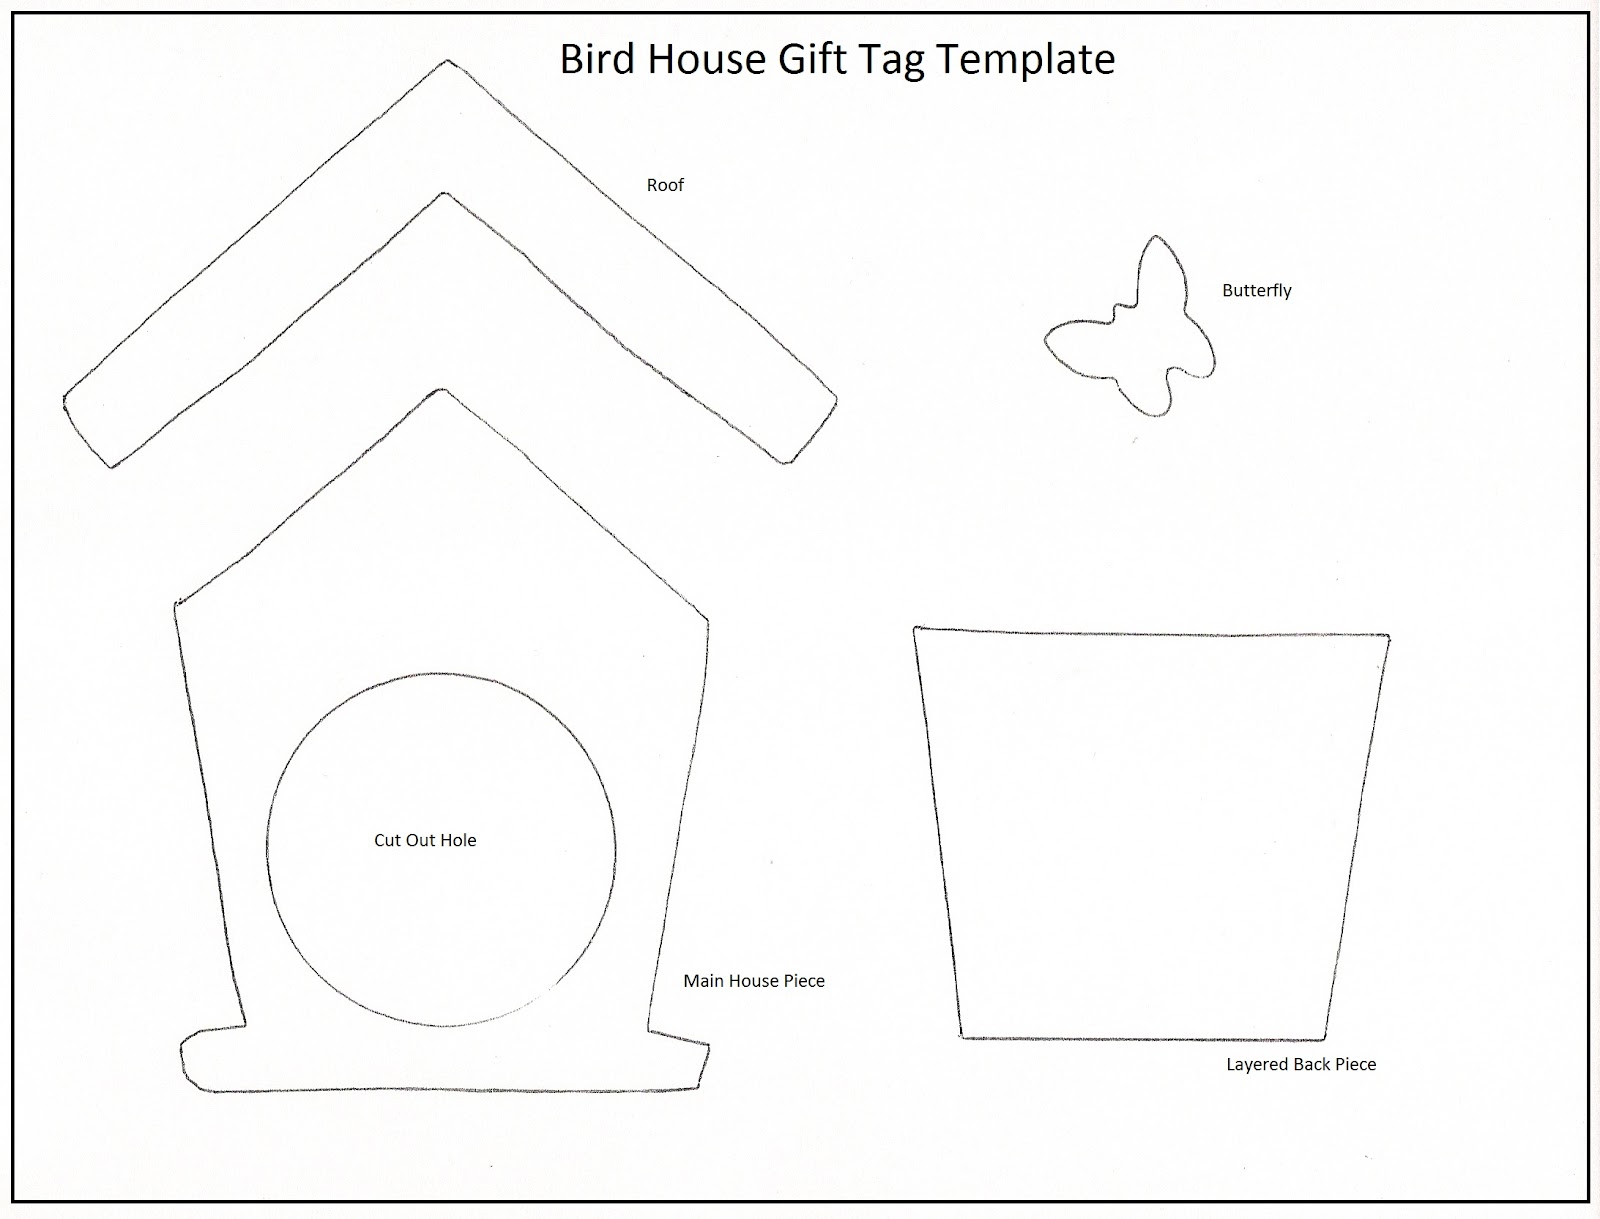 Done this way, your bird house gift tag will beasure about 5 inches ...